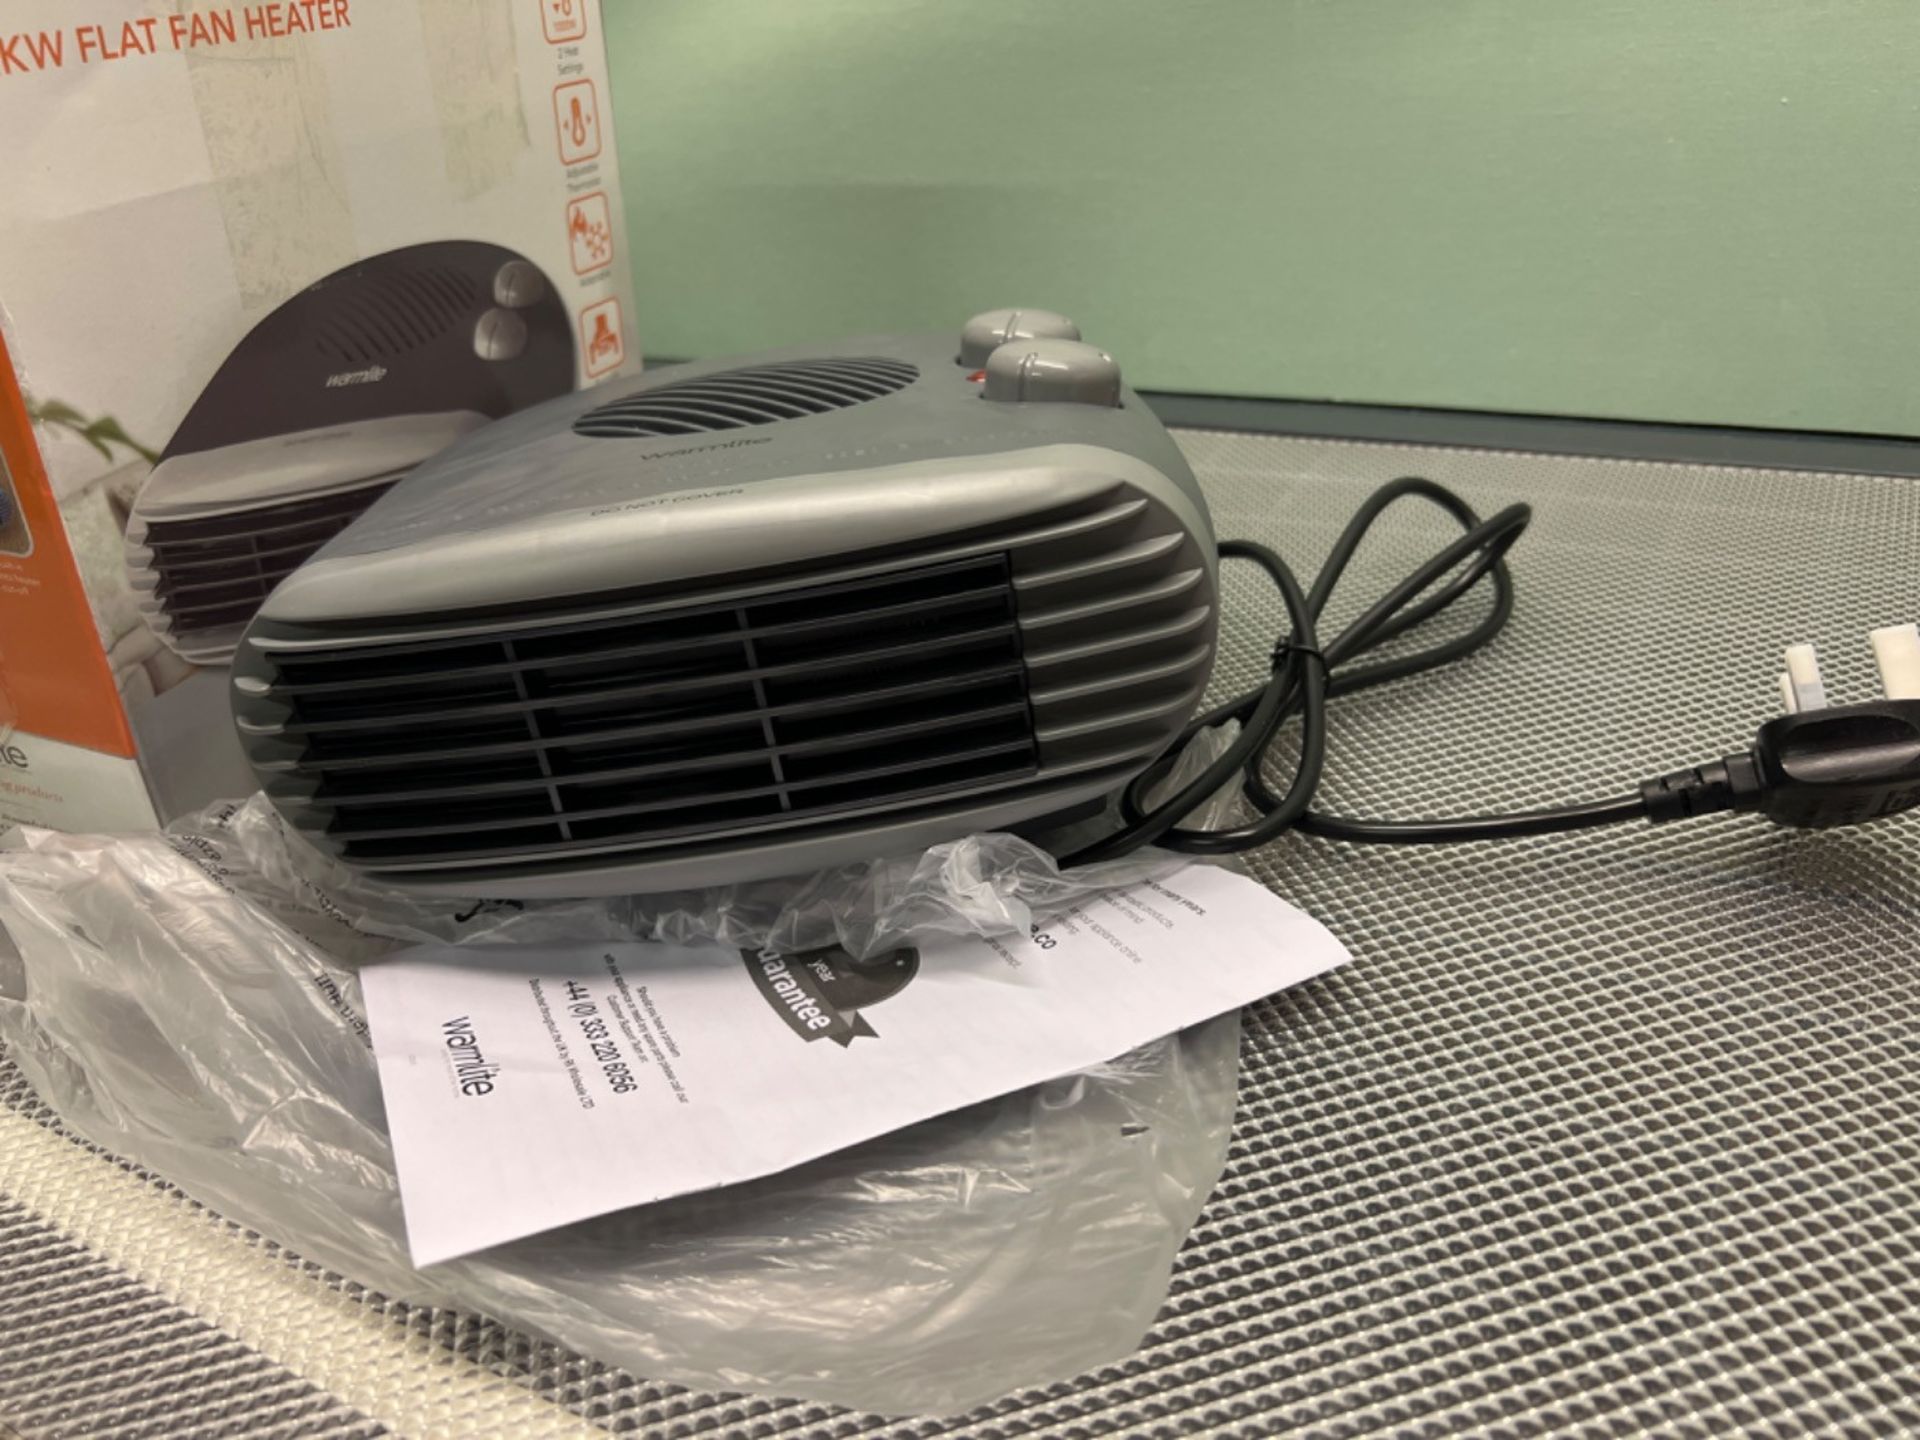 Warmlite WL44004DT 2000W Portable Flat Fan Heater with 2 Heat Settings and Overheat Protection, Dar - Image 2 of 3